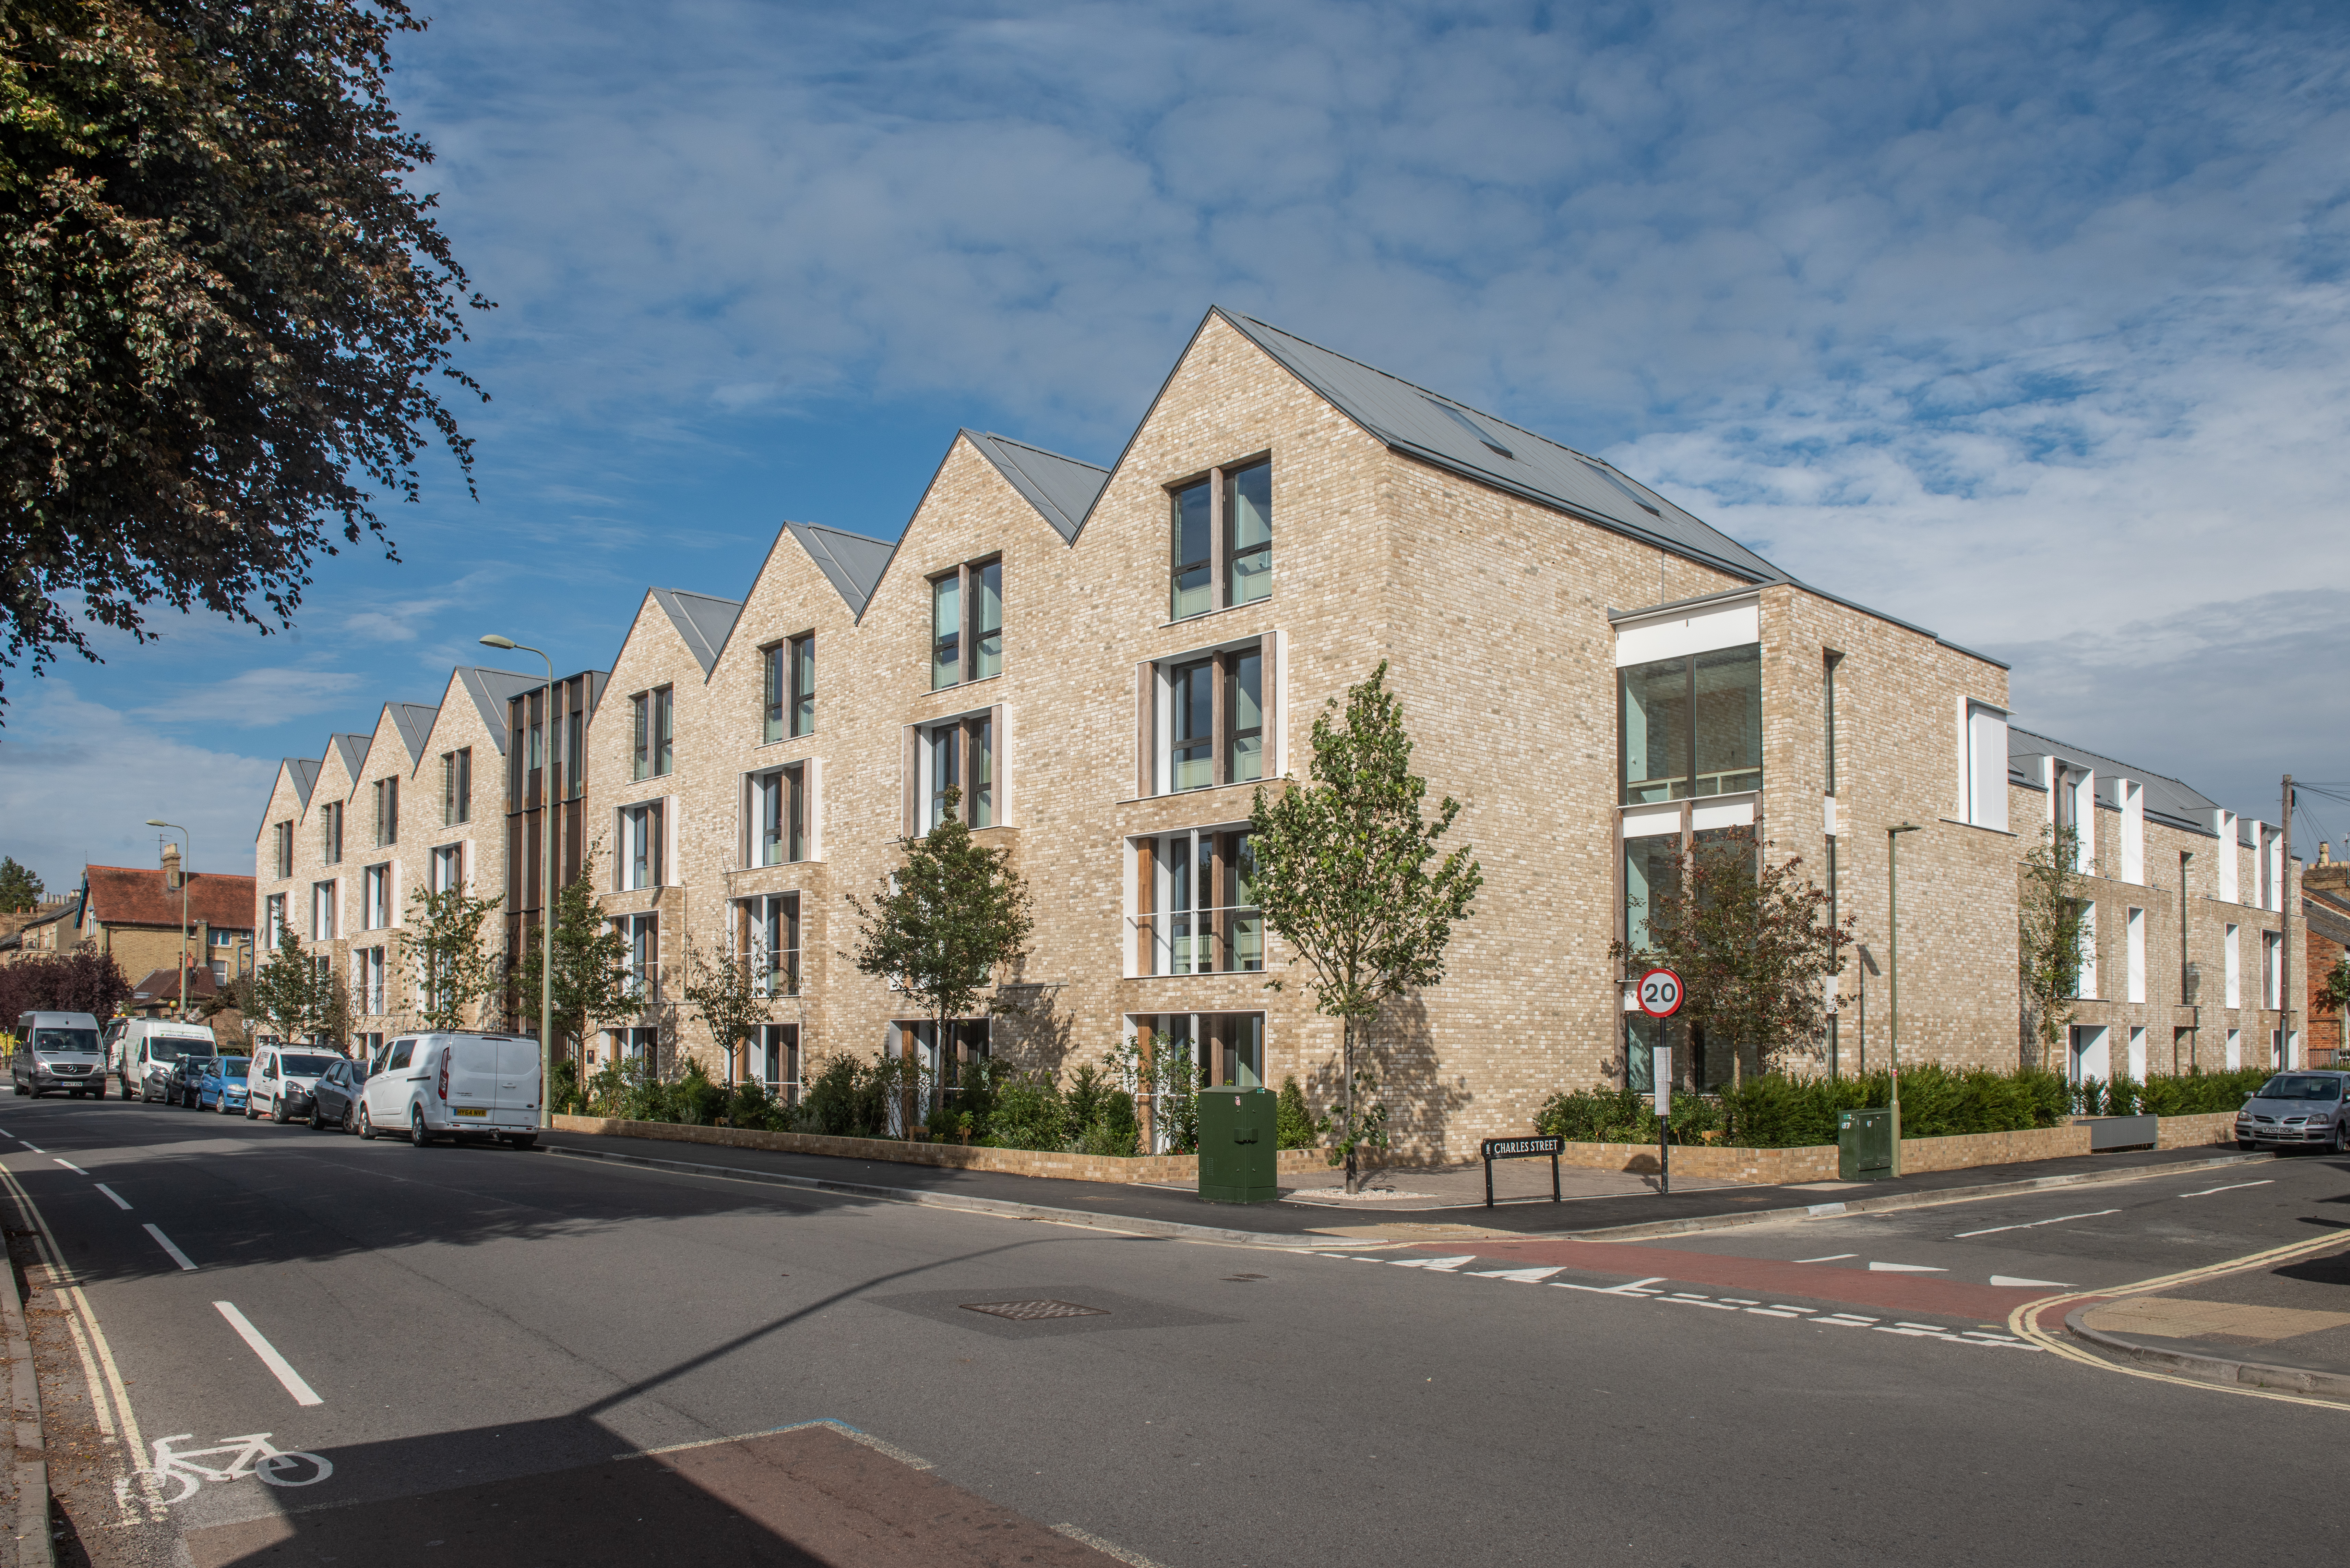 An award-winning student residential building for Wadham College